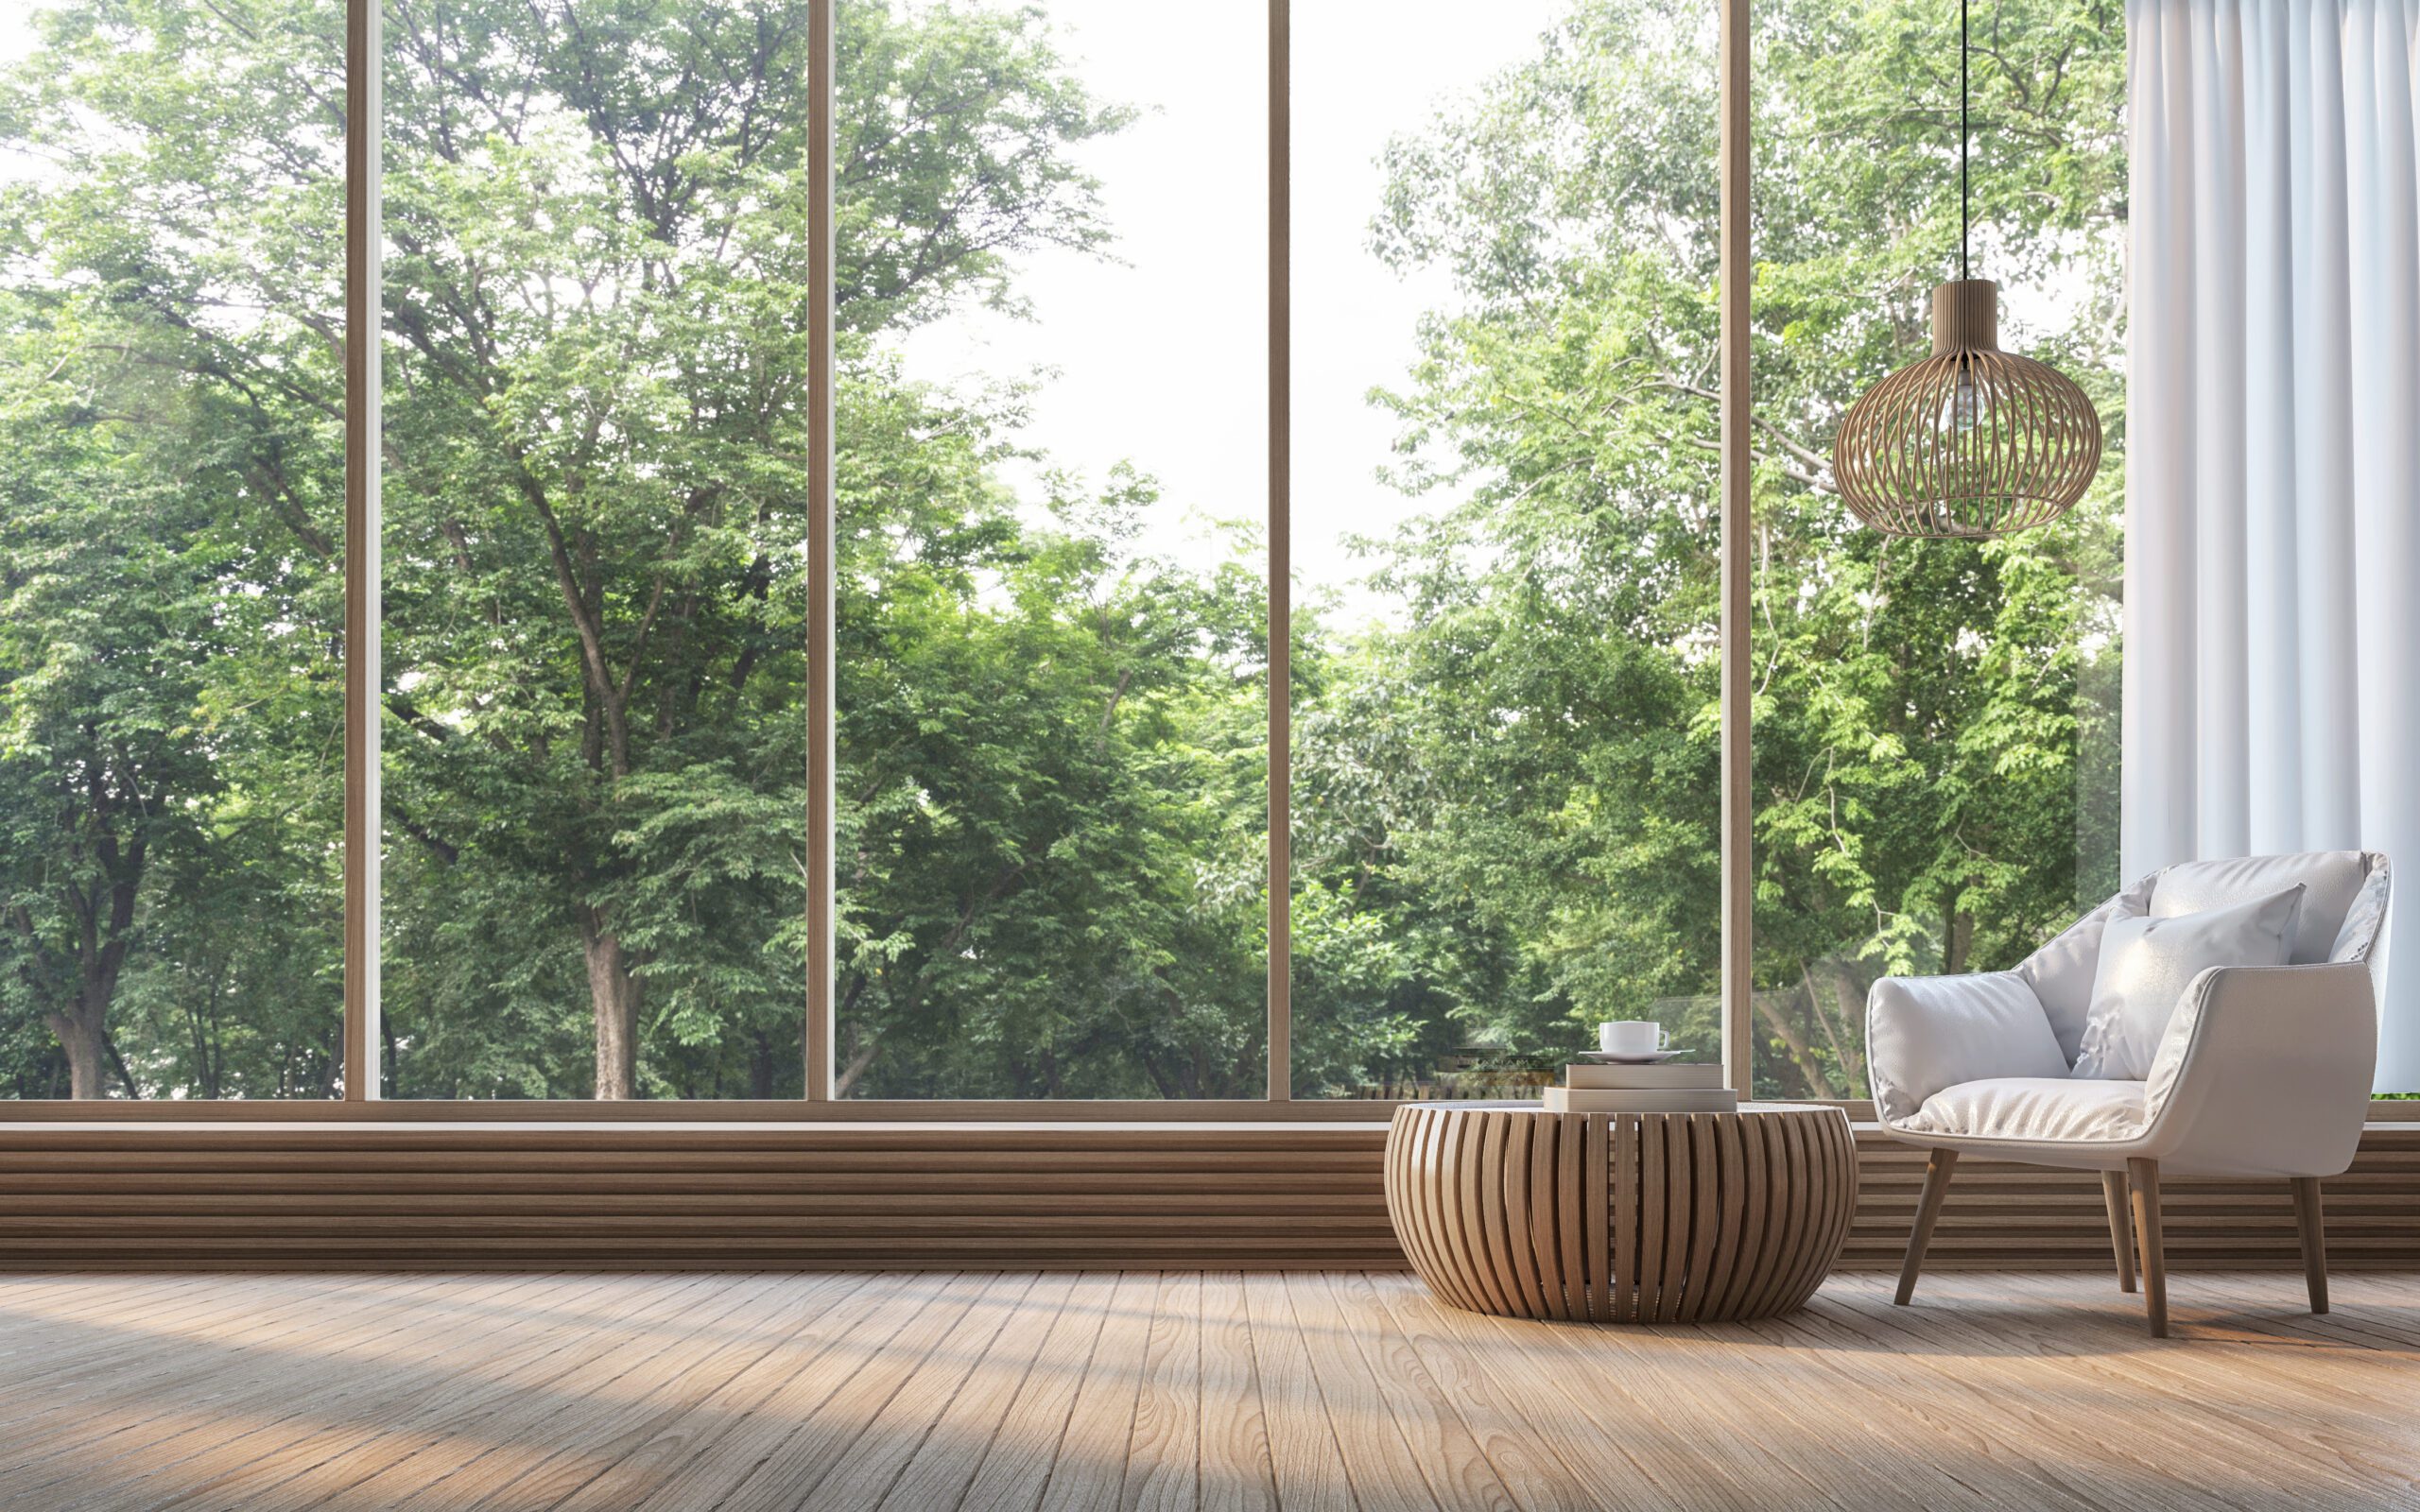 Large glass windows in sitting room with trees outside